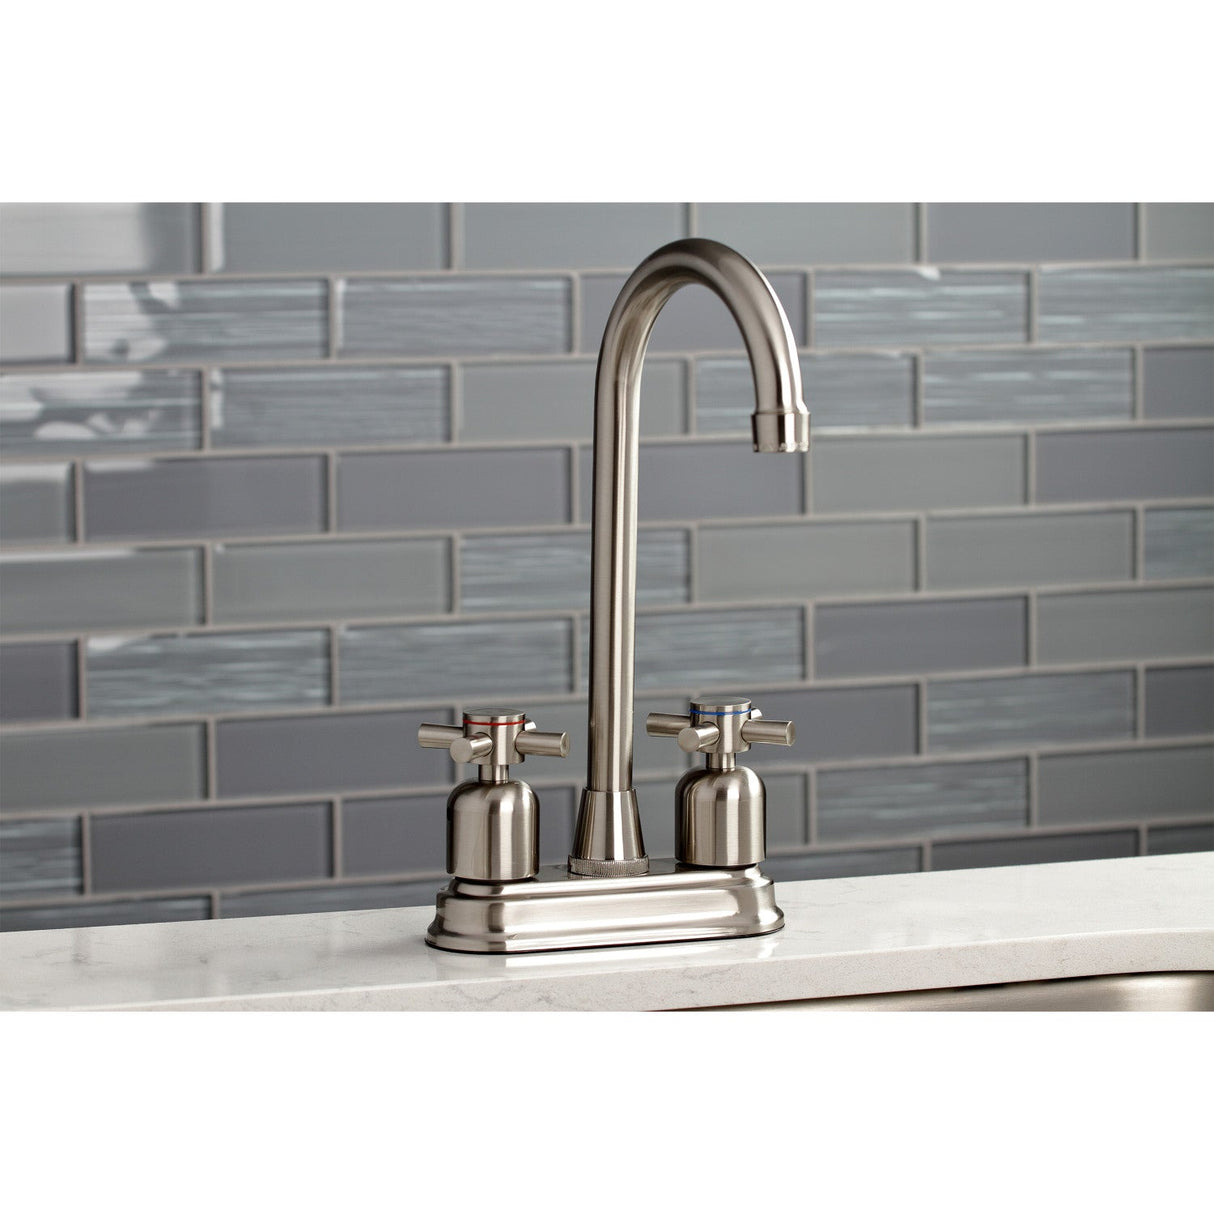 Concord KB8498DX Two-Handle 2-Hole Deck Mount Bar Faucet, Brushed Nickel